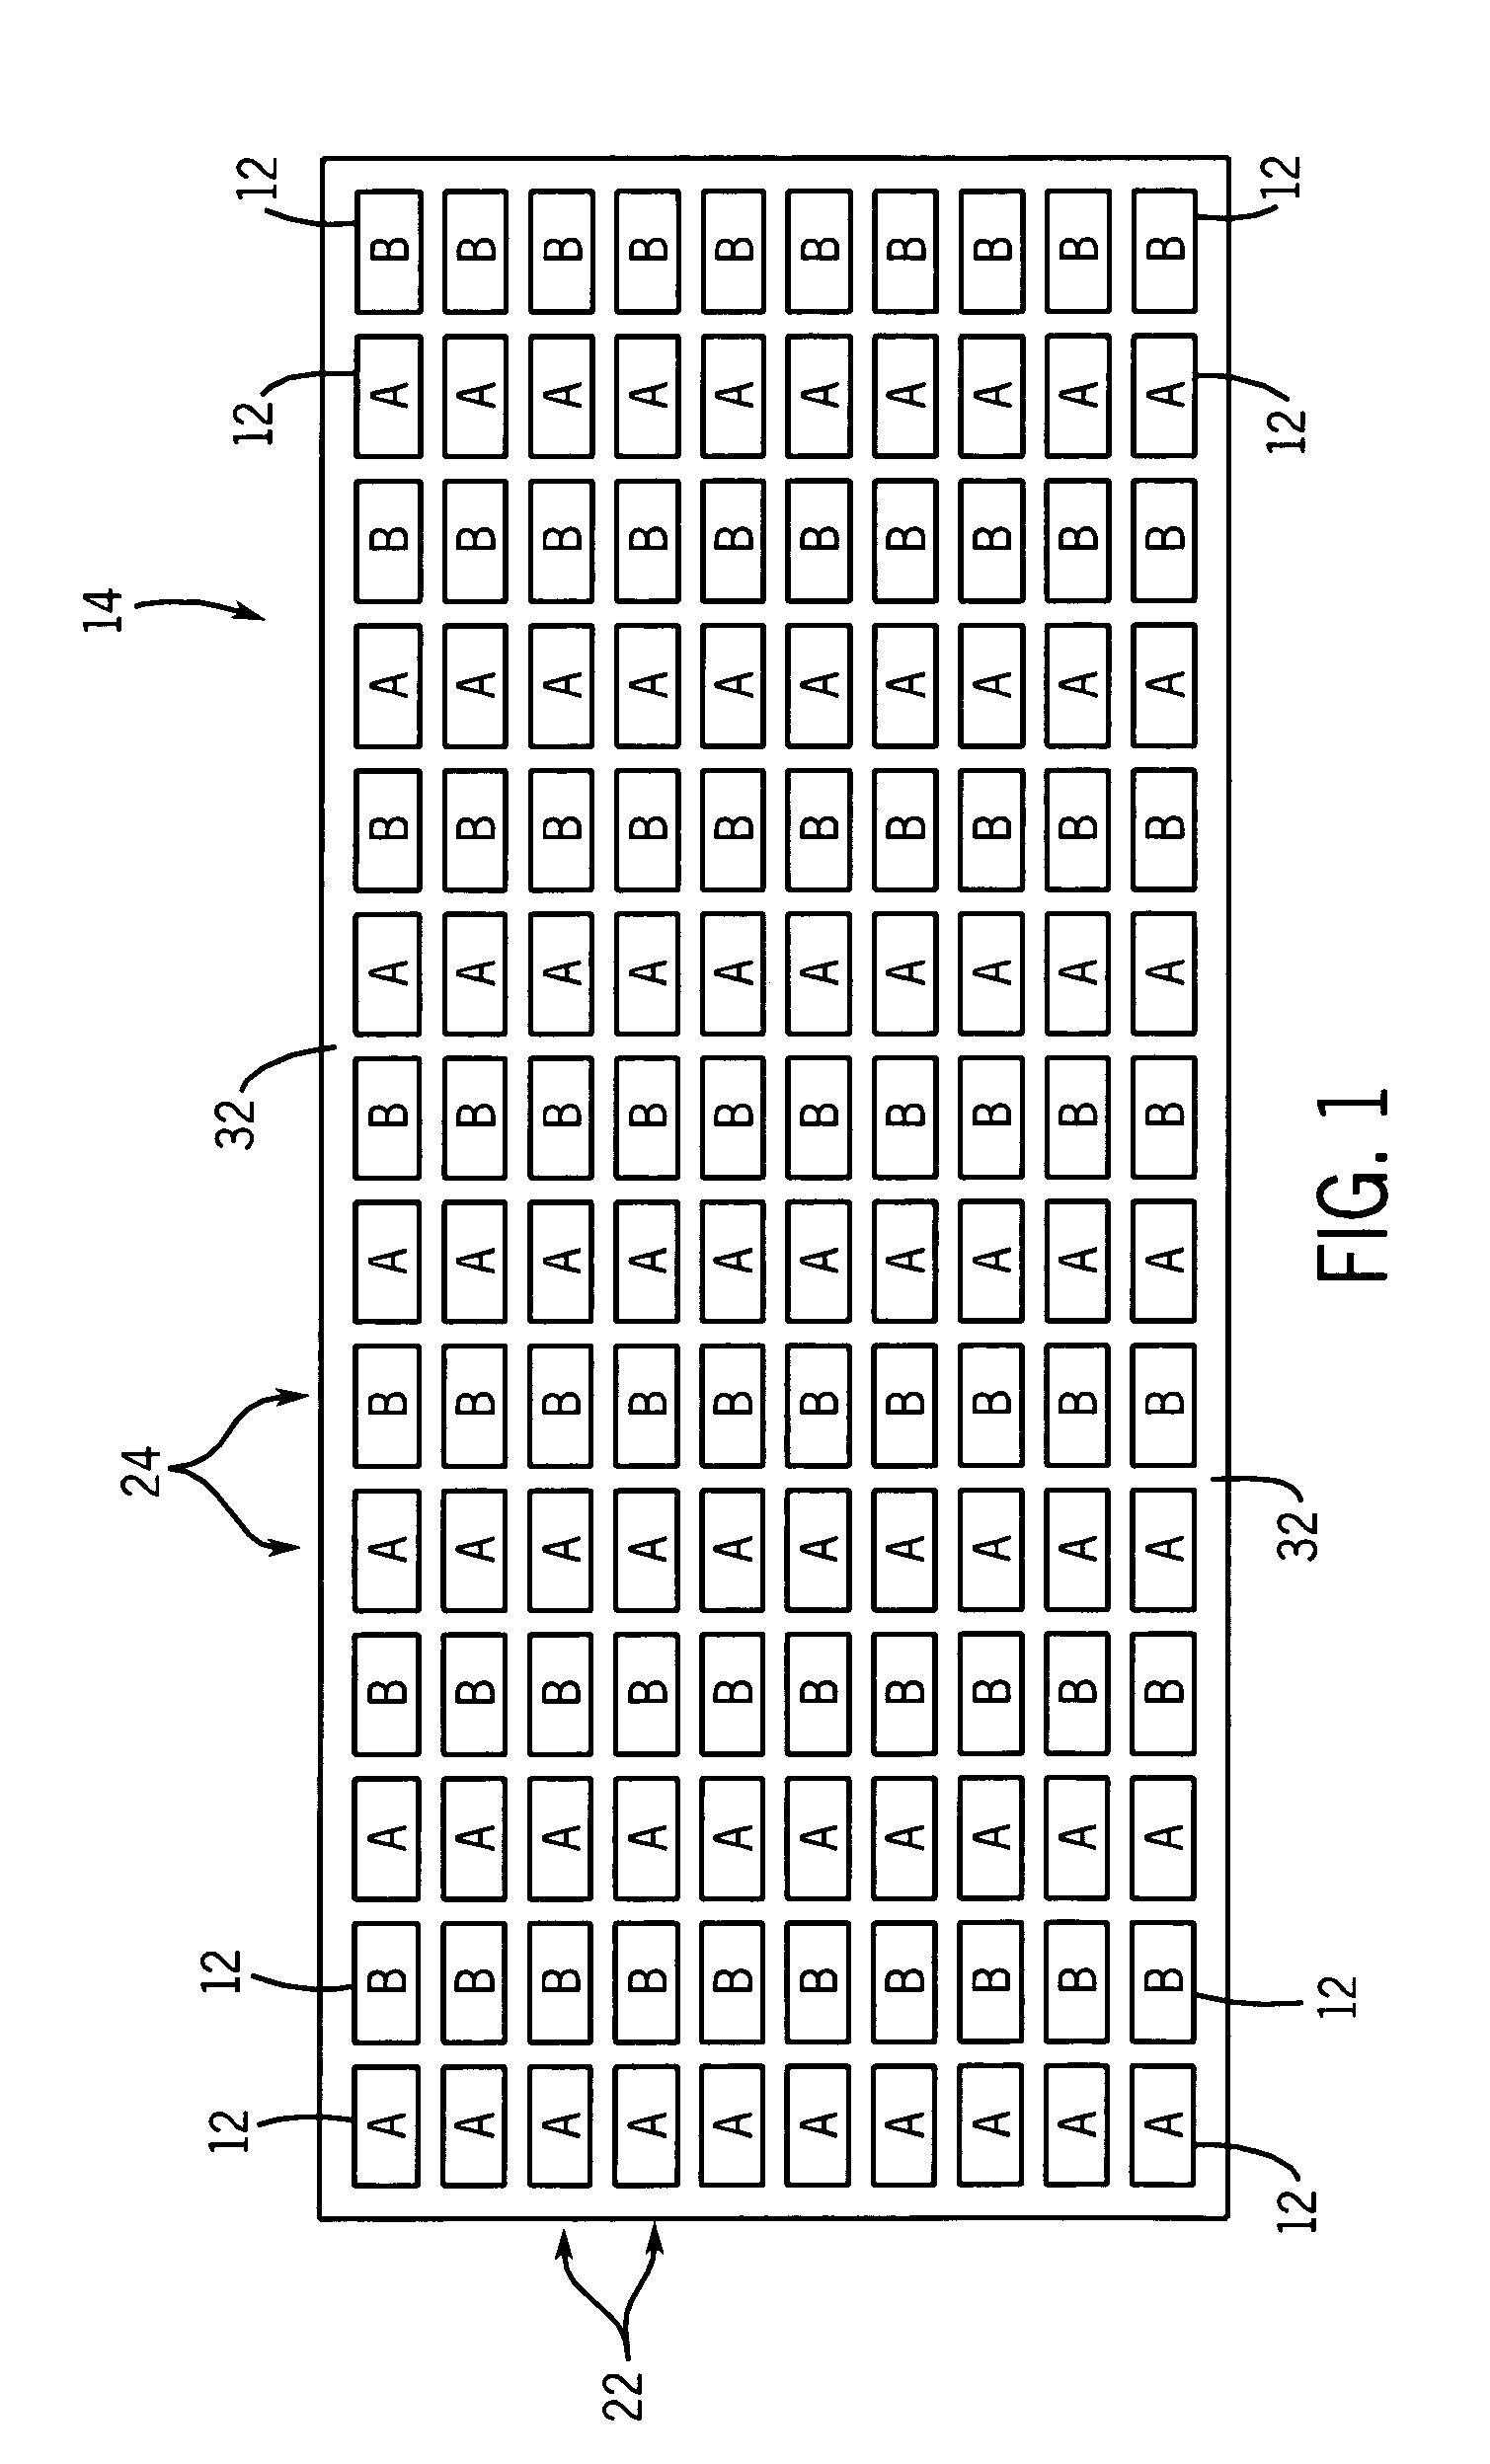 Apparatus and methods for preventing engagement of stacked embossed cards